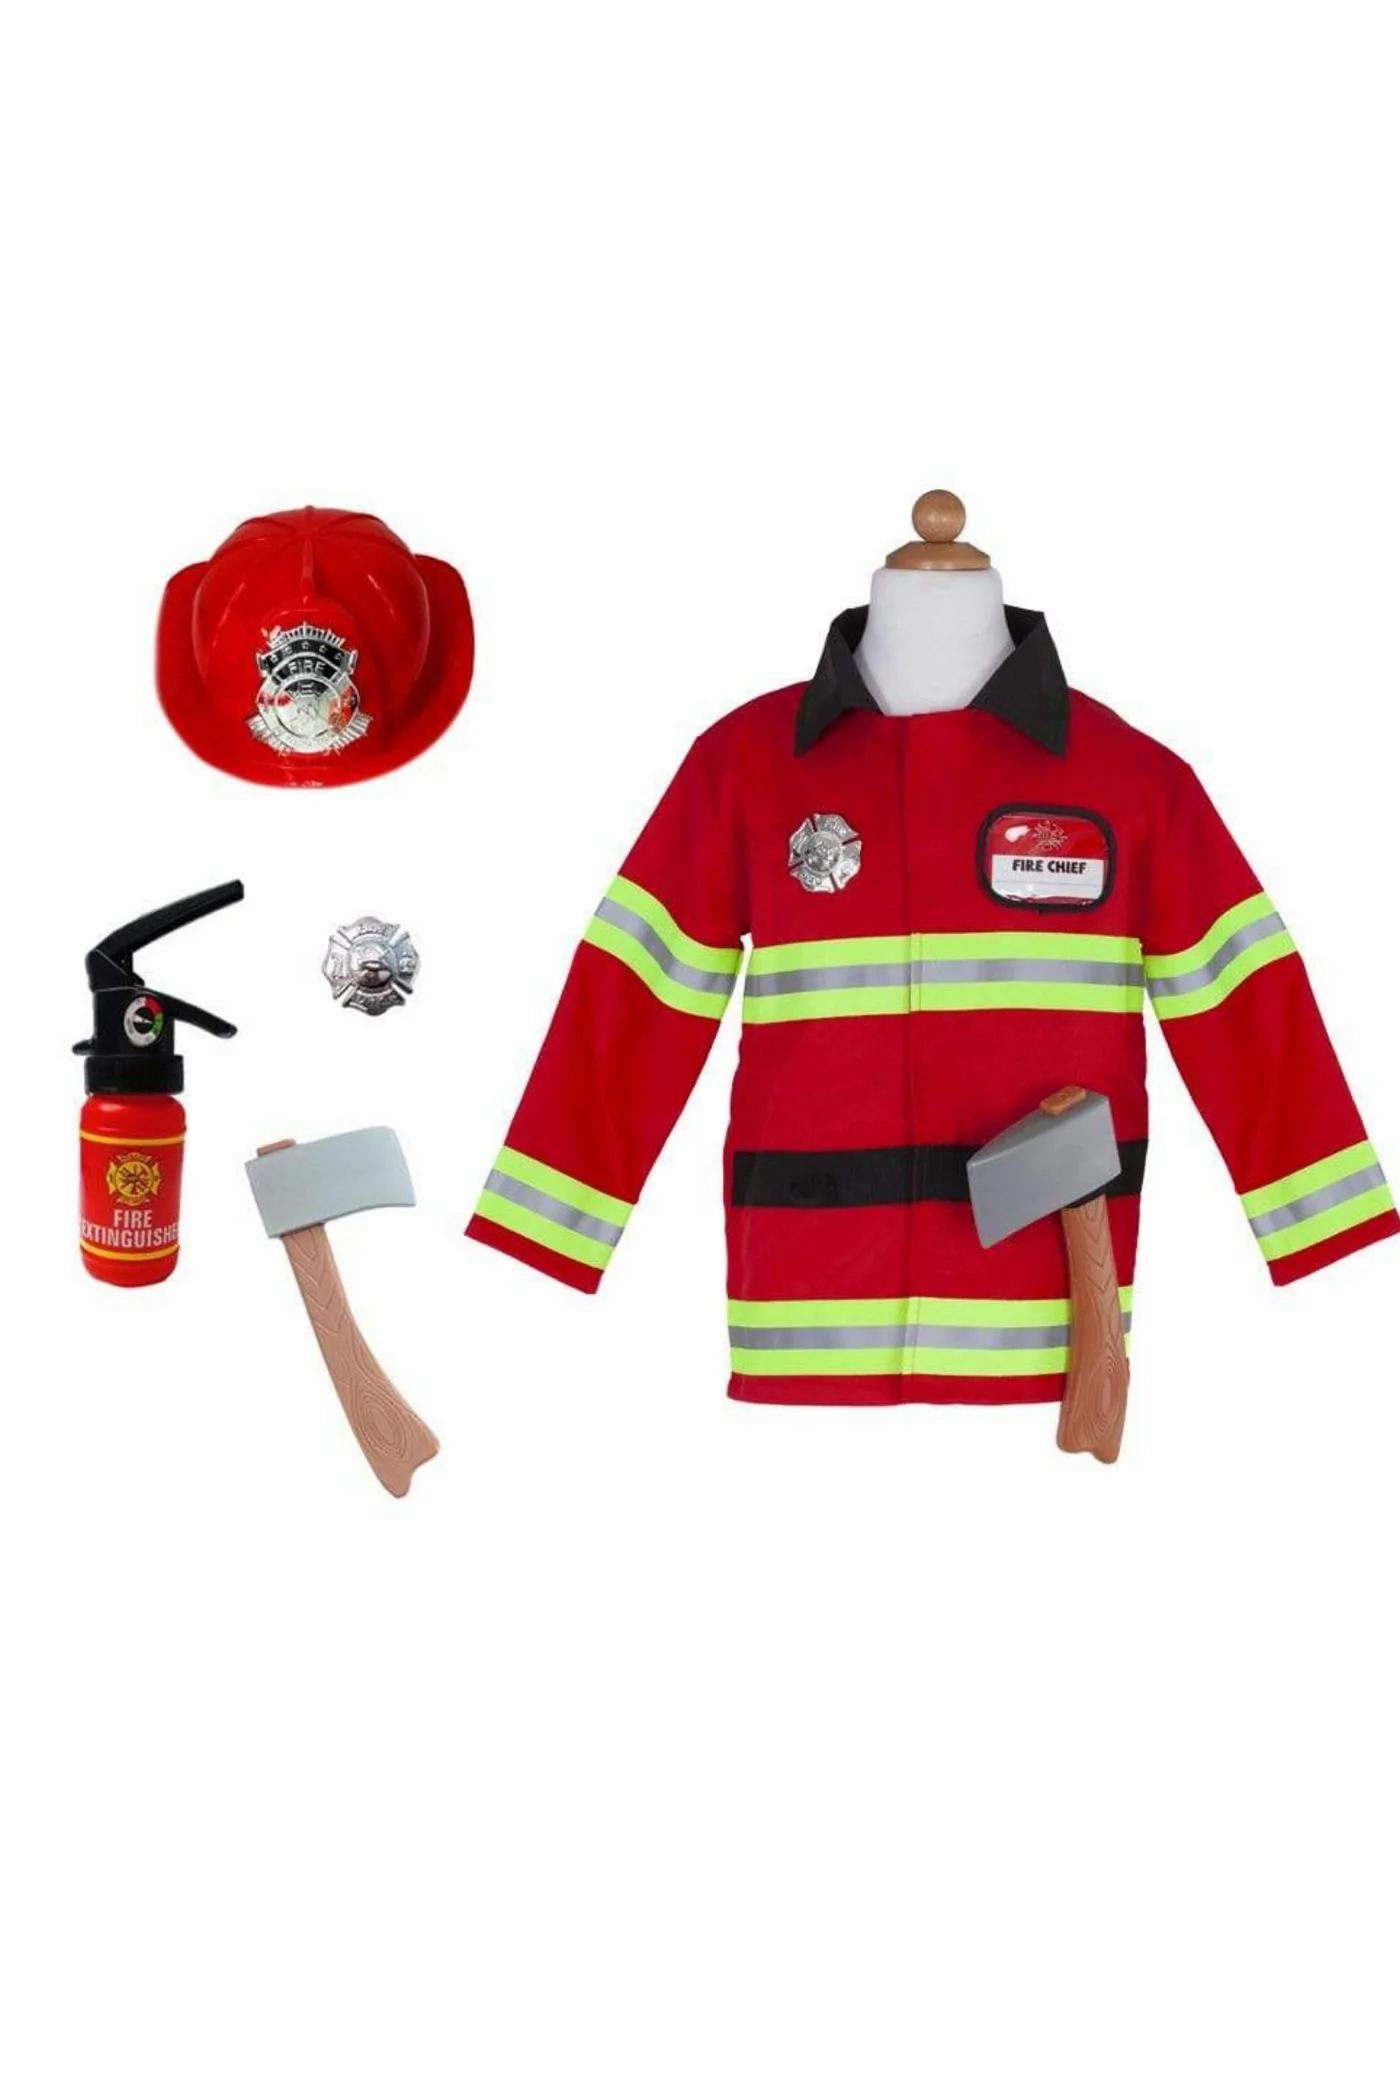 Firefighter 5  Size 5-6